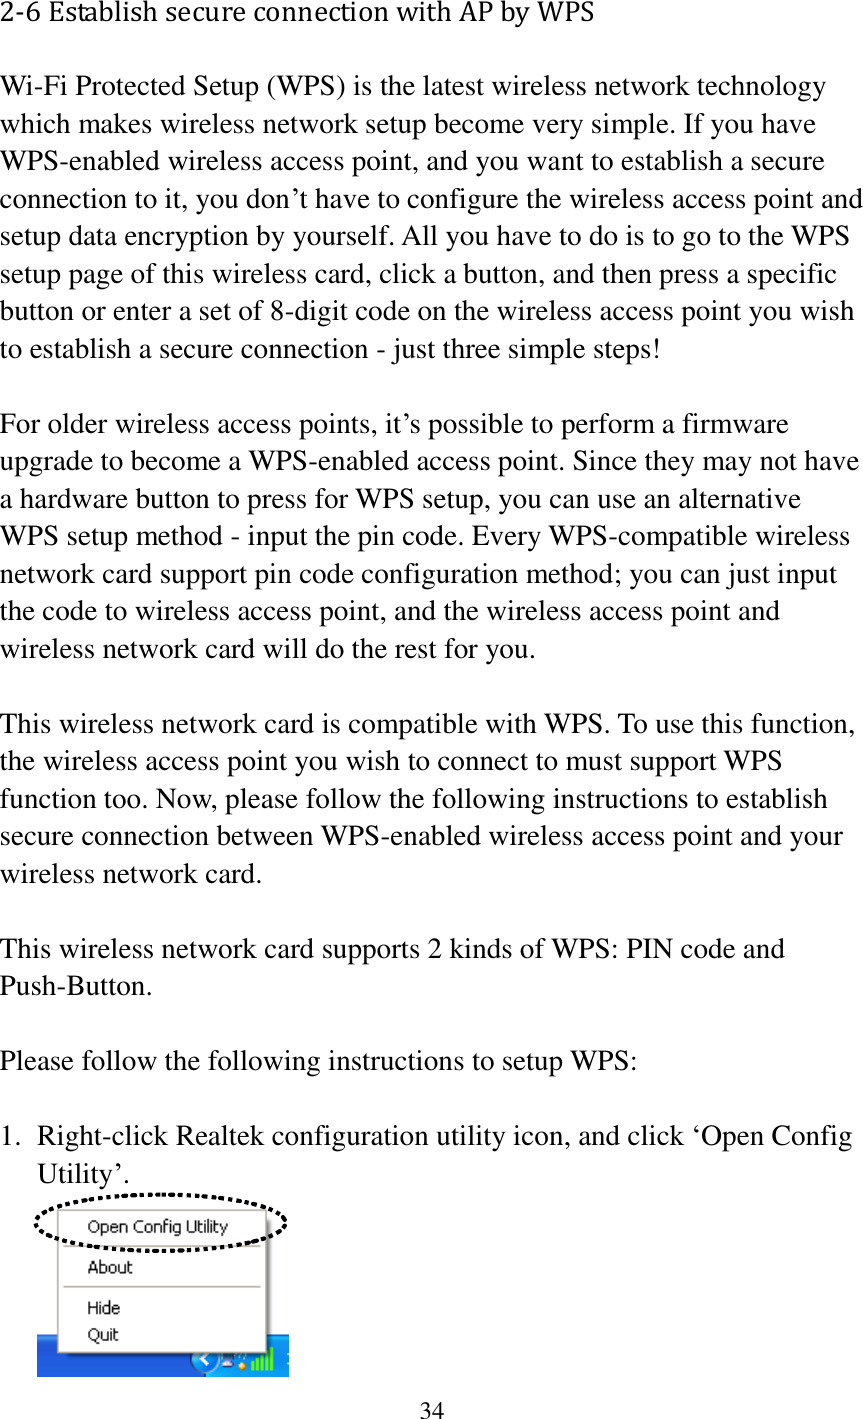 34  2-6 Establish secure connection with AP by WPS Wi-Fi Protected Setup (WPS) is the latest wireless network technology which makes wireless network setup become very simple. If you have WPS-enabled wireless access point, and you want to establish a secure connection to it, you don’t have to configure the wireless access point and setup data encryption by yourself. All you have to do is to go to the WPS setup page of this wireless card, click a button, and then press a specific button or enter a set of 8-digit code on the wireless access point you wish to establish a secure connection - just three simple steps!    For older wireless access points, it’s possible to perform a firmware upgrade to become a WPS-enabled access point. Since they may not have a hardware button to press for WPS setup, you can use an alternative WPS setup method - input the pin code. Every WPS-compatible wireless network card support pin code configuration method; you can just input the code to wireless access point, and the wireless access point and wireless network card will do the rest for you.  This wireless network card is compatible with WPS. To use this function, the wireless access point you wish to connect to must support WPS function too. Now, please follow the following instructions to establish secure connection between WPS-enabled wireless access point and your wireless network card.  This wireless network card supports 2 kinds of WPS: PIN code and Push-Button.    Please follow the following instructions to setup WPS:  1. Right-click Realtek configuration utility icon, and click ‘Open Config Utility’.  